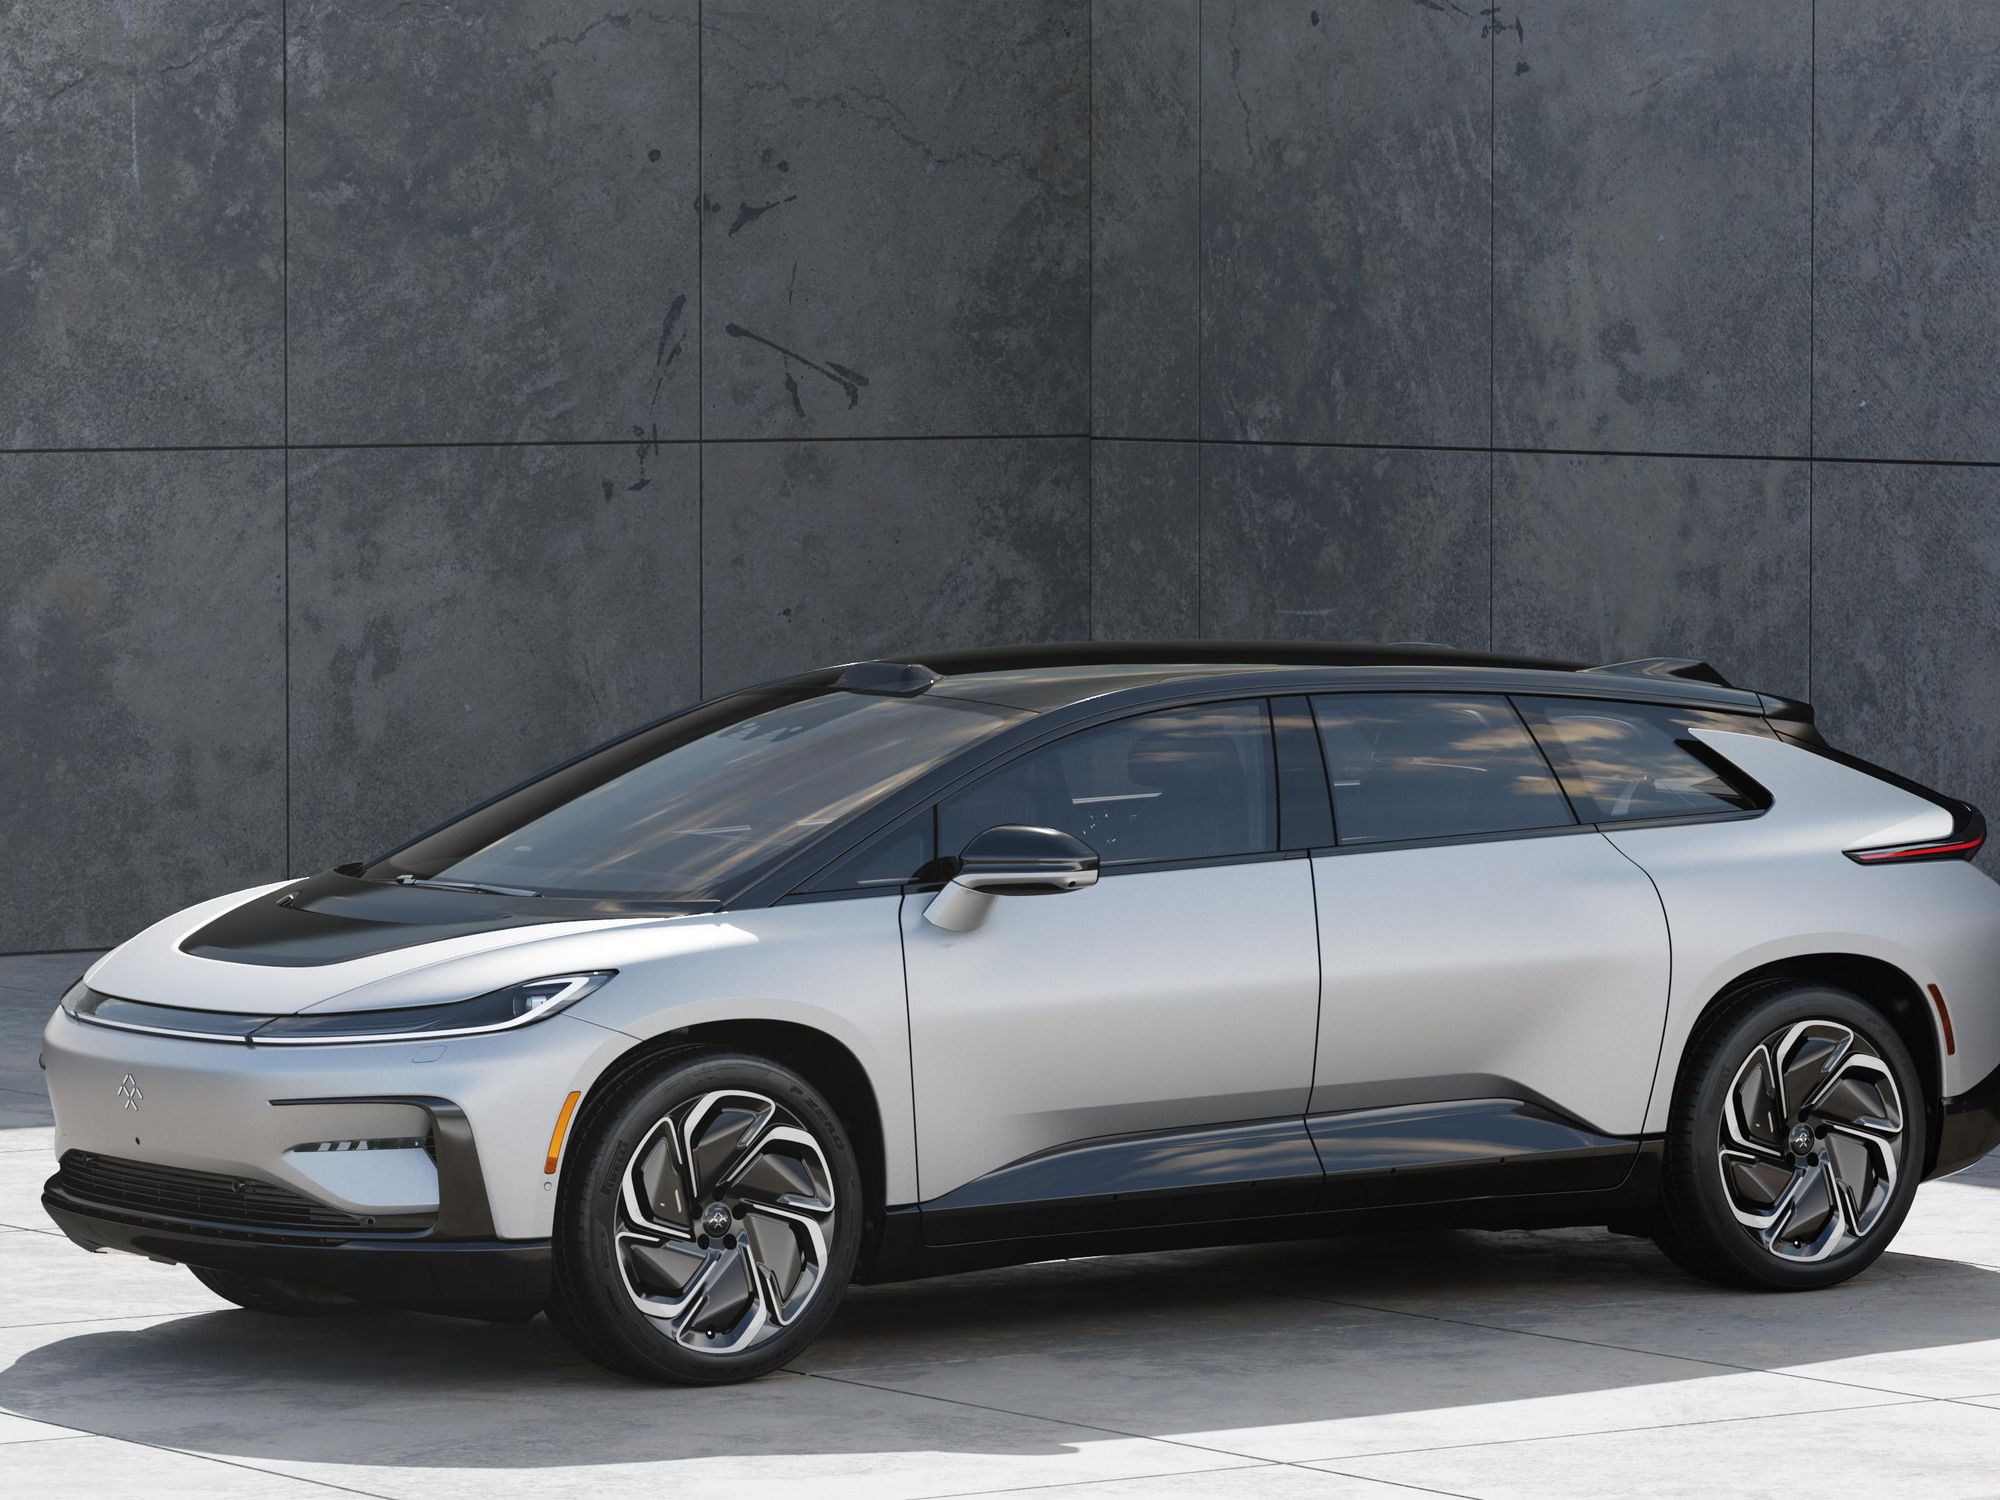 Faraday Future Is Planning a New Factory in China